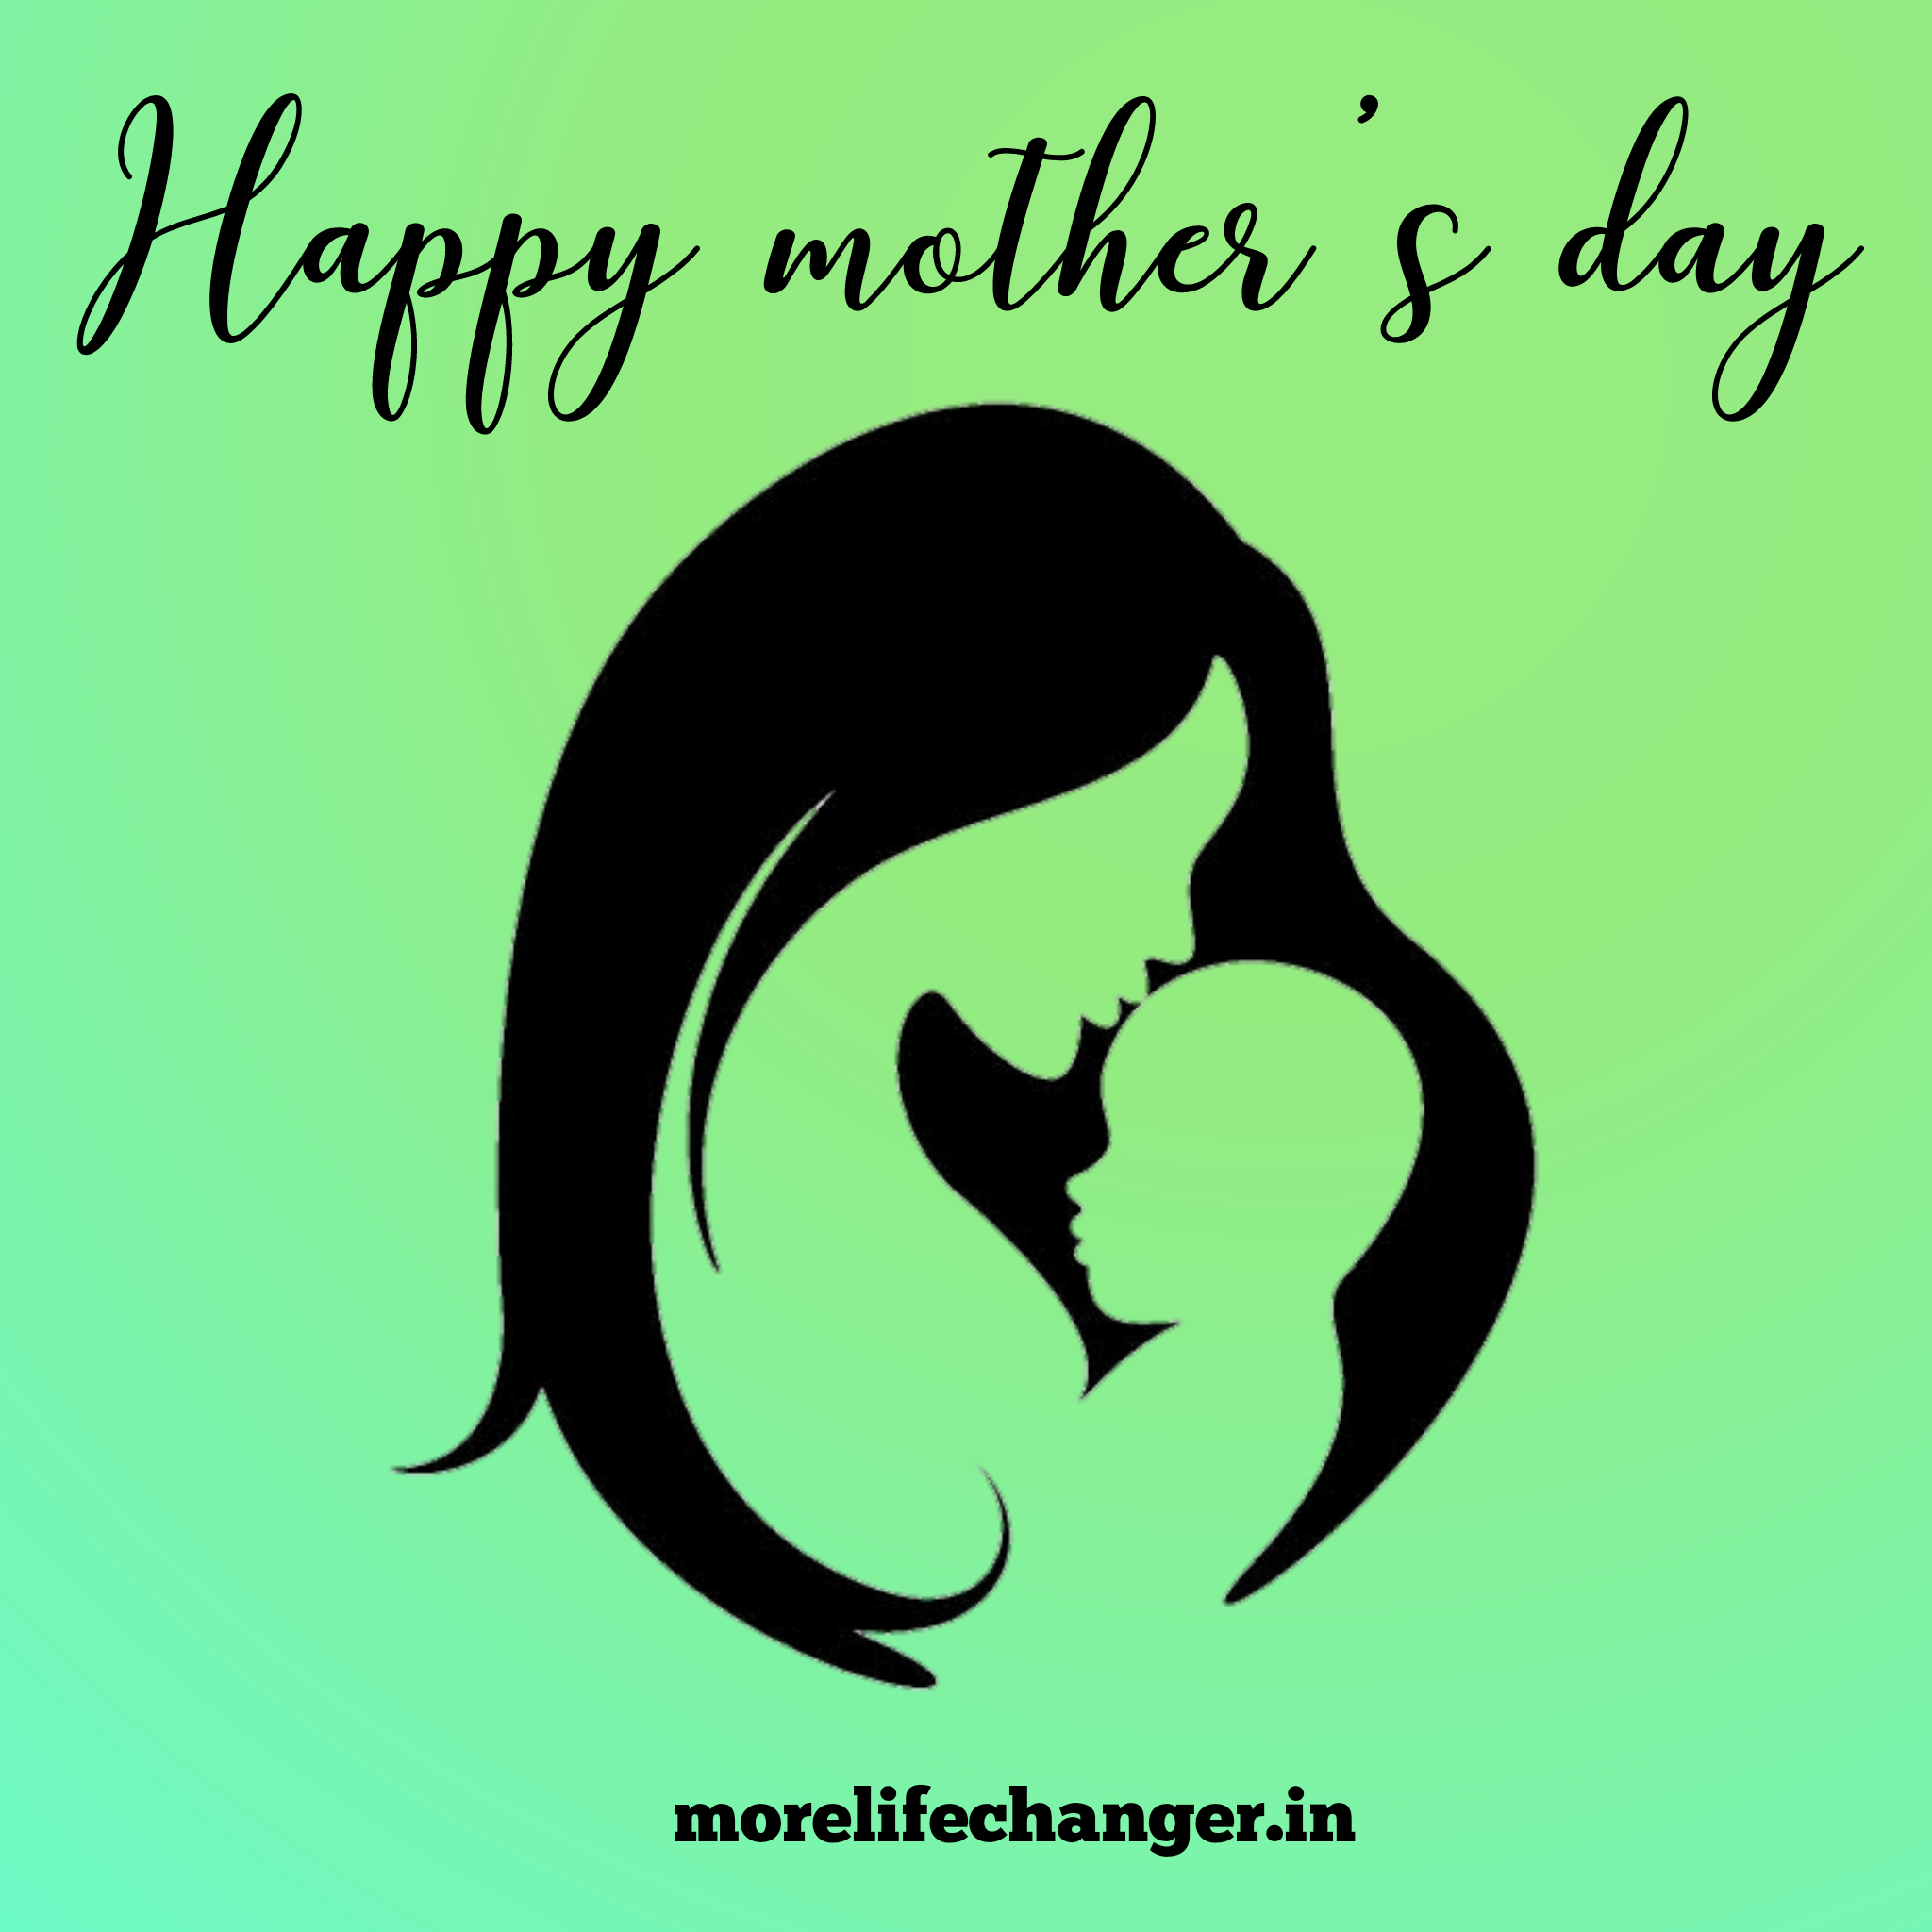 Happy mothers day blog